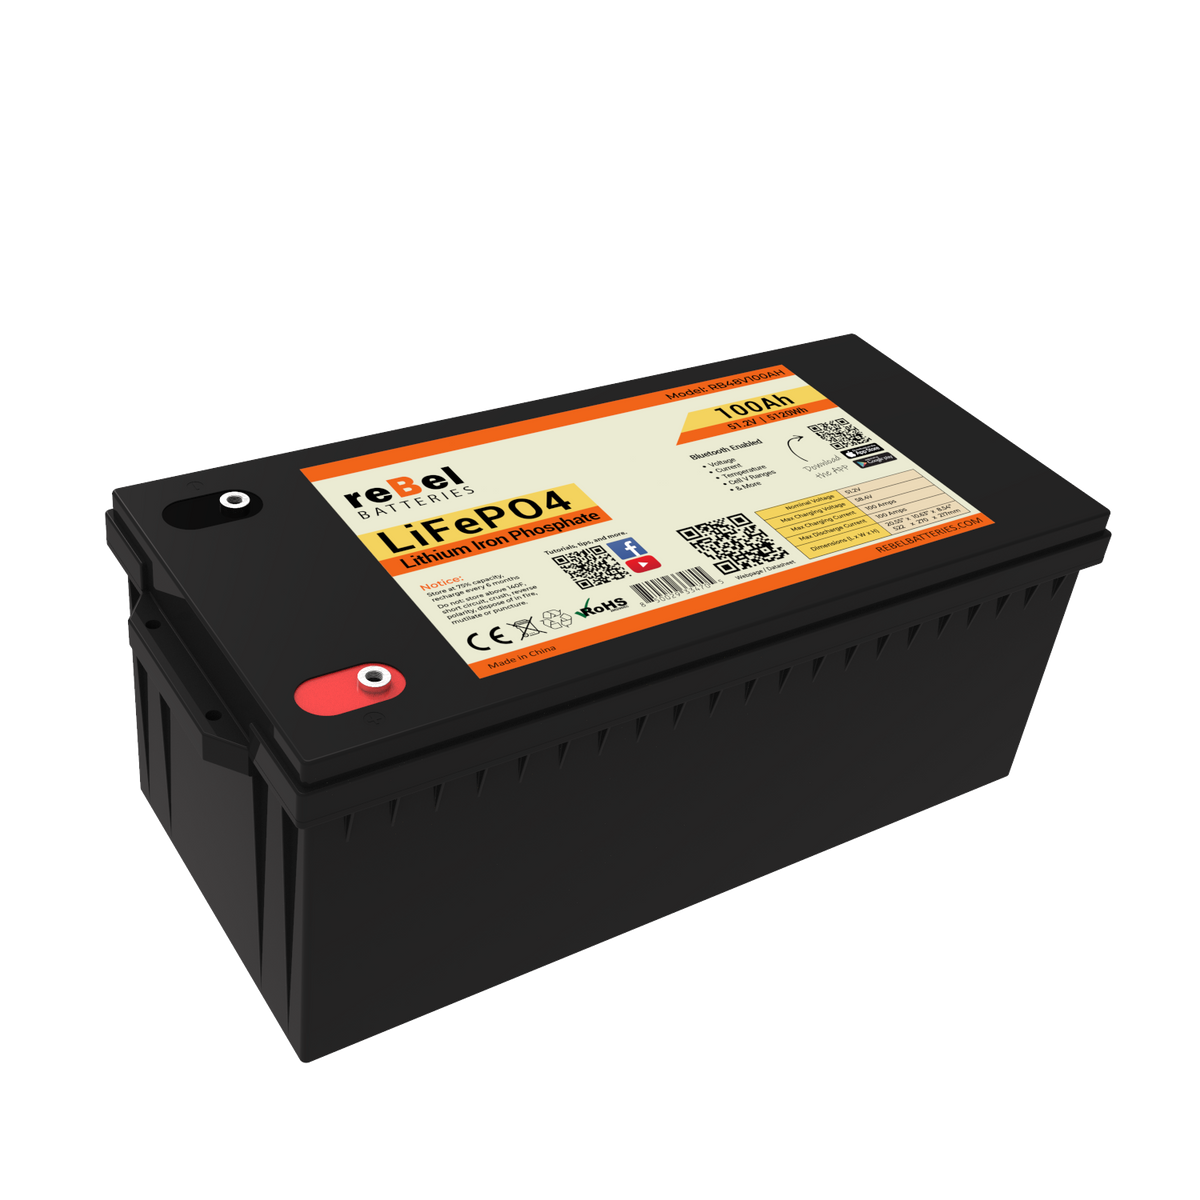 48V 100AH LiFePO4 Smart Bluetooth Enabled Rechargeable Lithium Iron Phosphate Battery